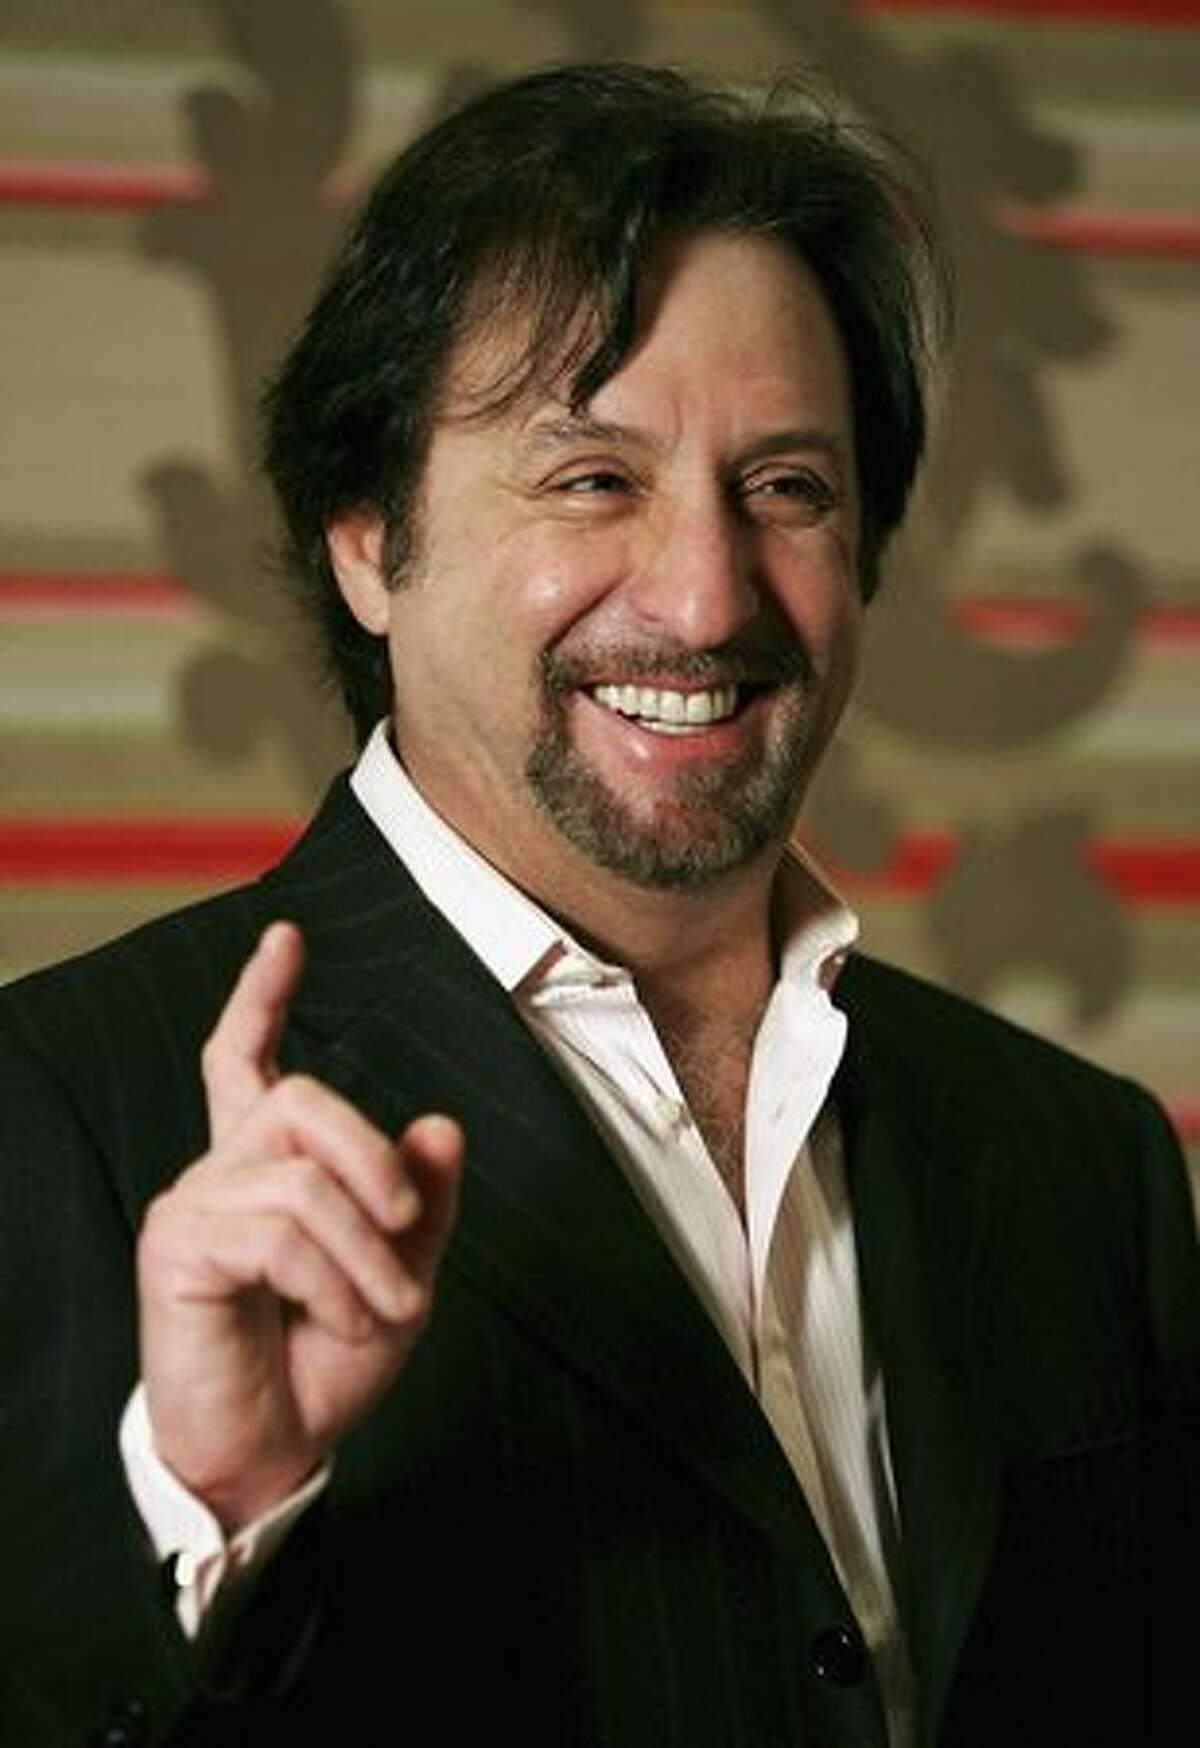 Actor Ron Silver launching his latest film "Red Mercury" at The Covent Garden Hotel on Jan. 19, 2005 in London. Silver died March 15, 2009 at the age of 62.